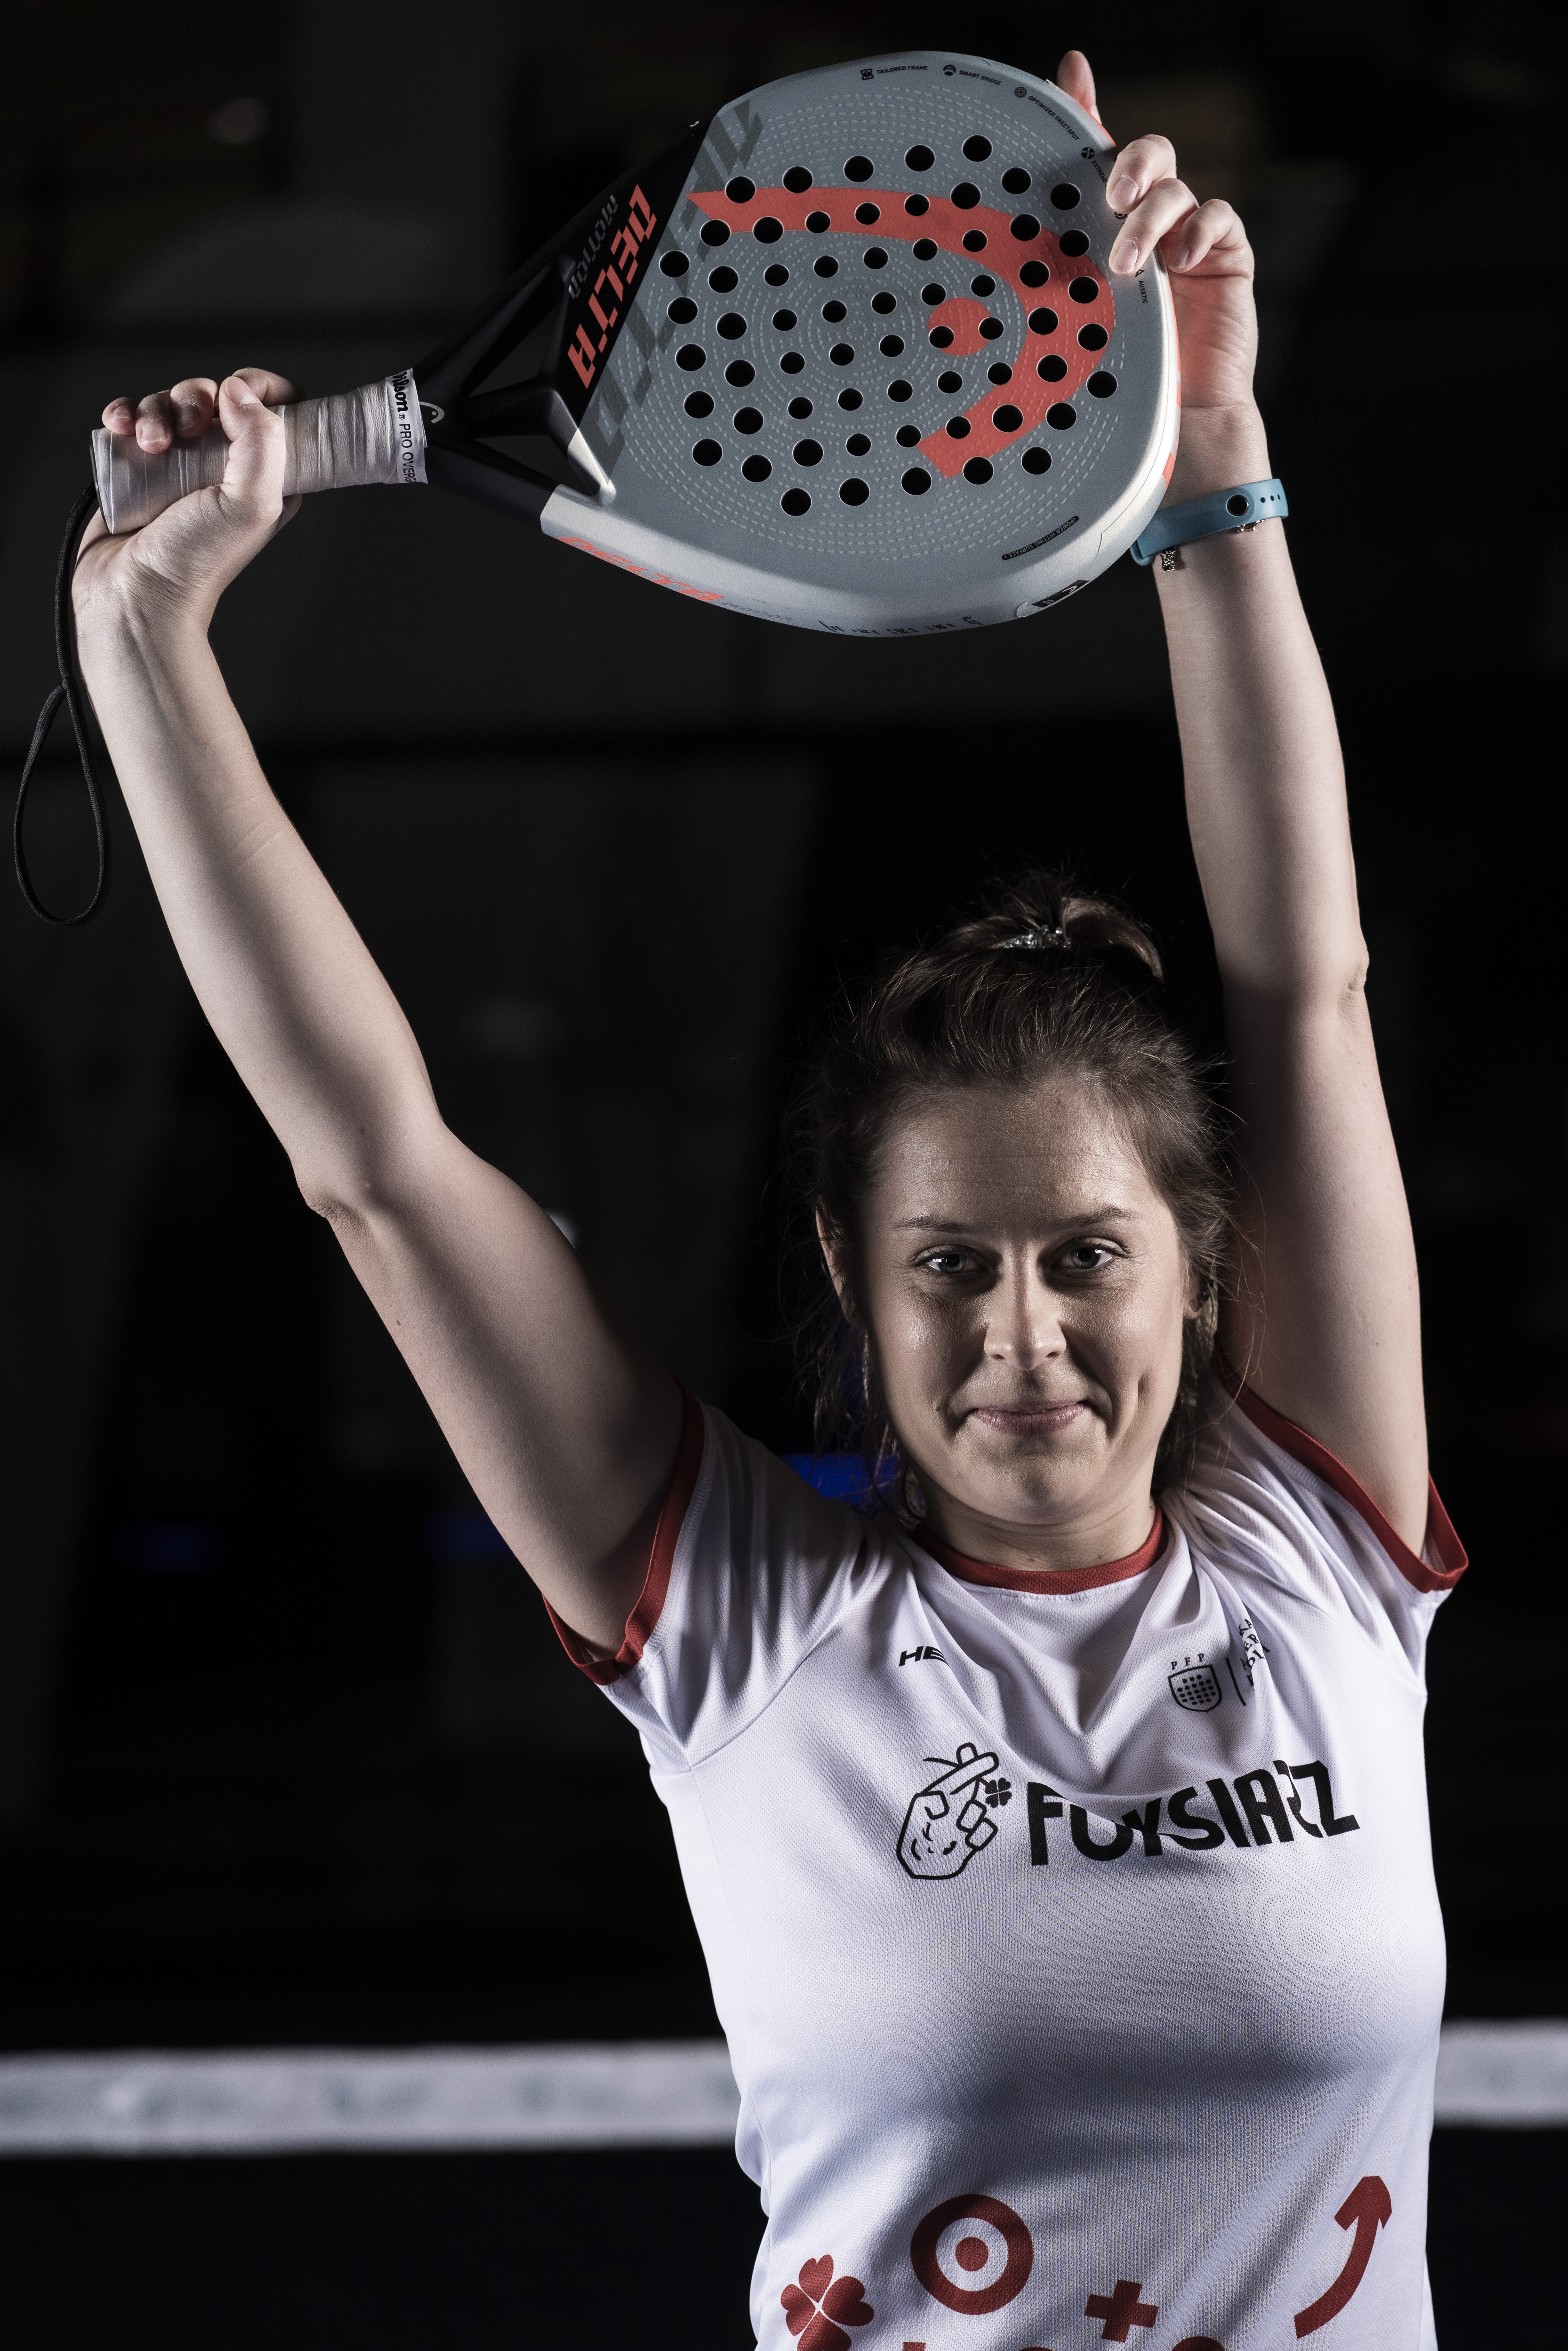 <strong>Zofia Piórkowska: It was love from the first time I grabbed the padel racket</strong>